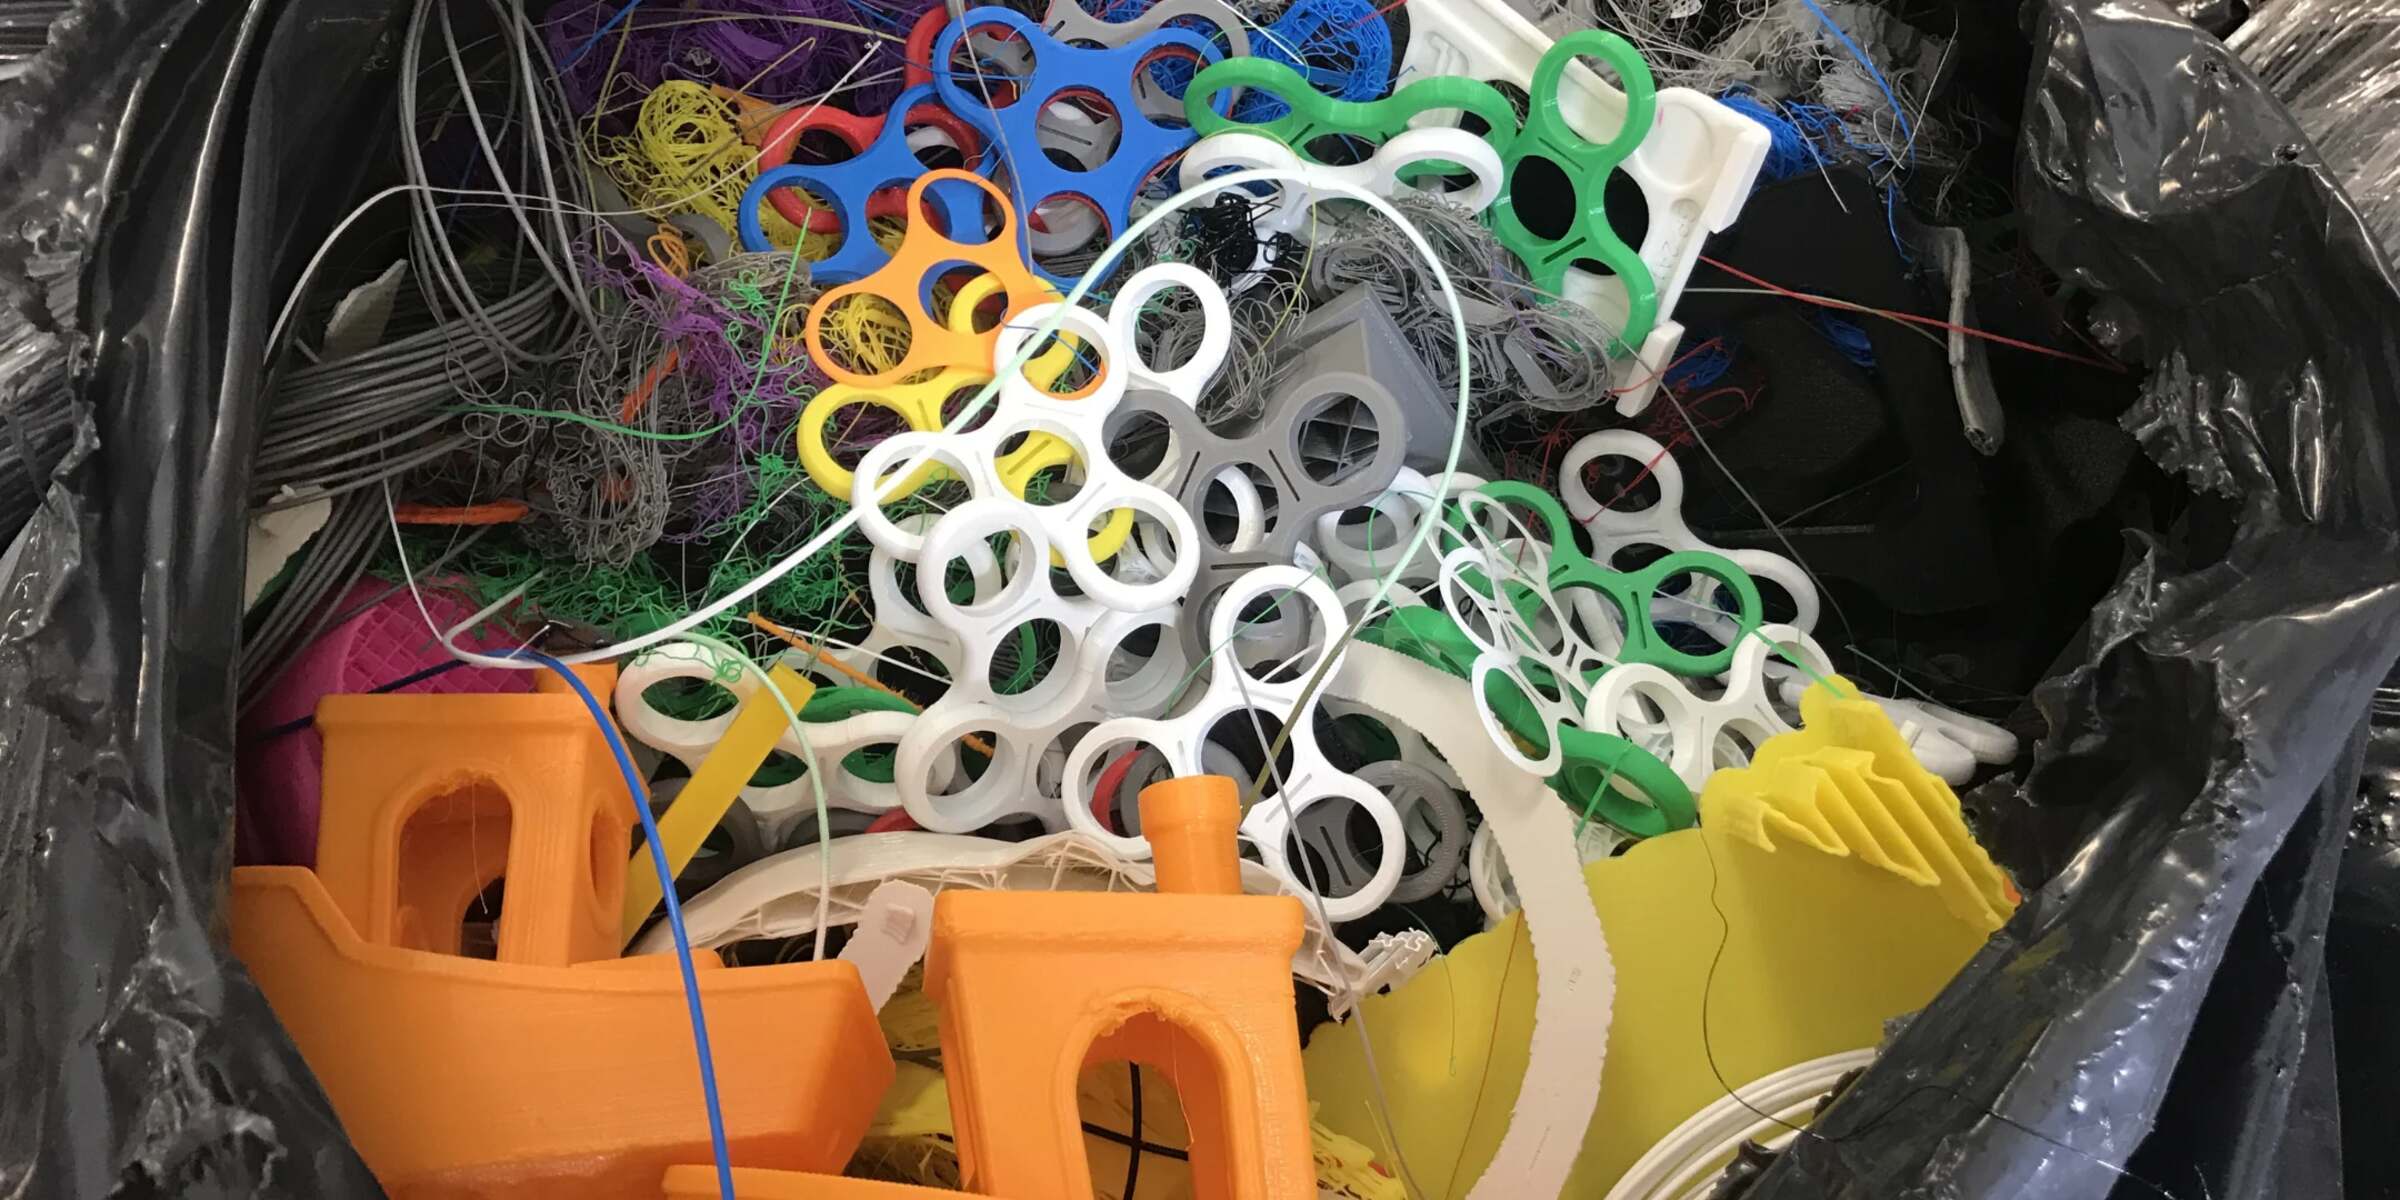 How To Recycle 3D Printer Filament